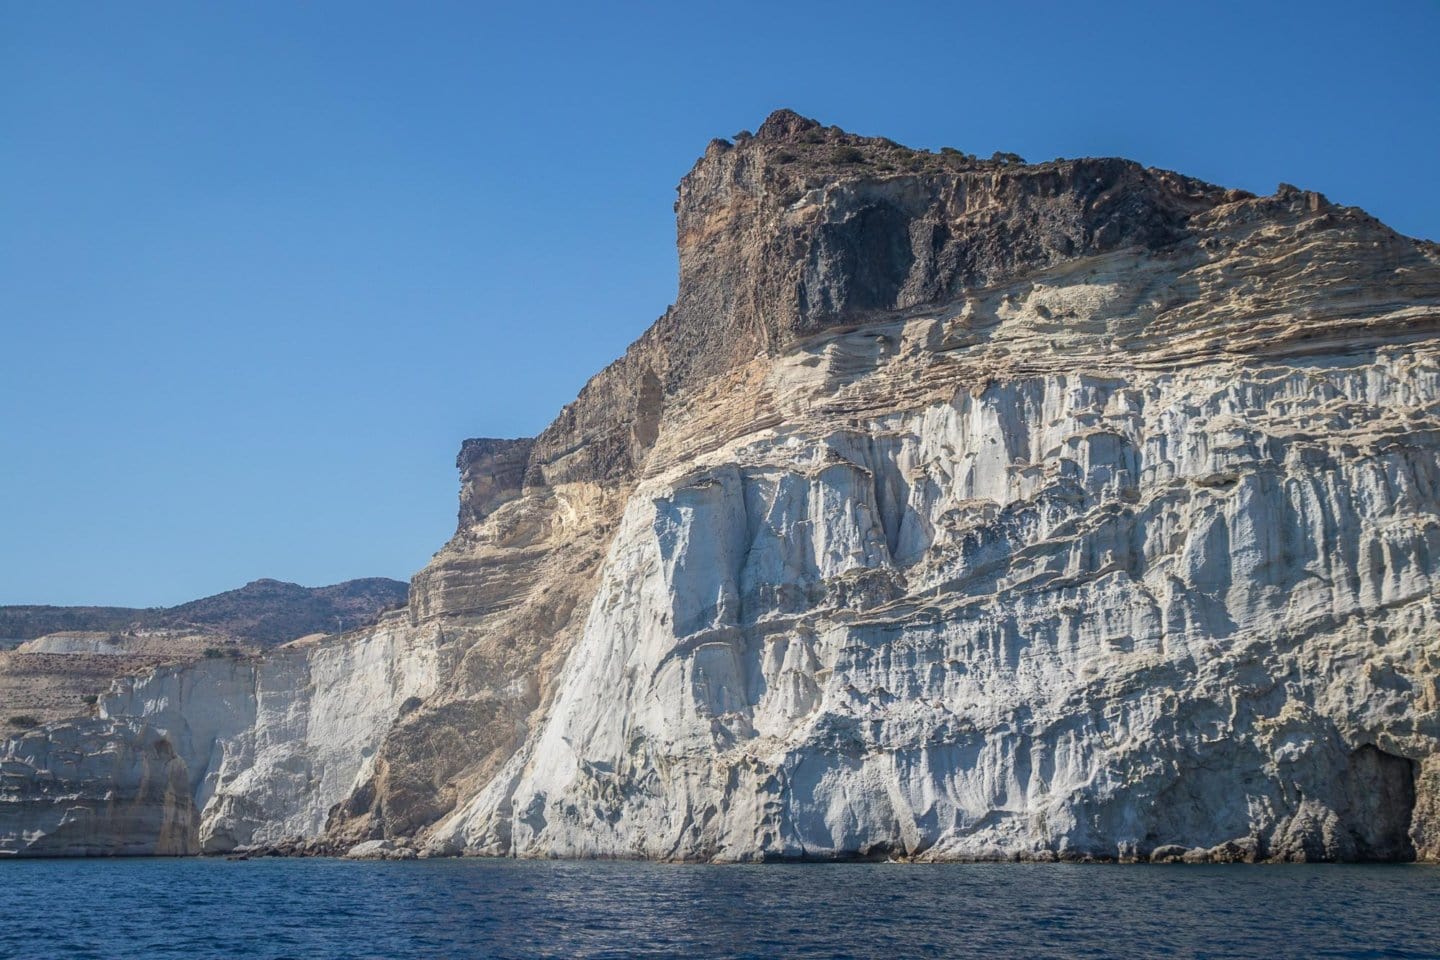 Rock formations near Gerontas beach on Milos island. Seen in passing during a sailing trip.